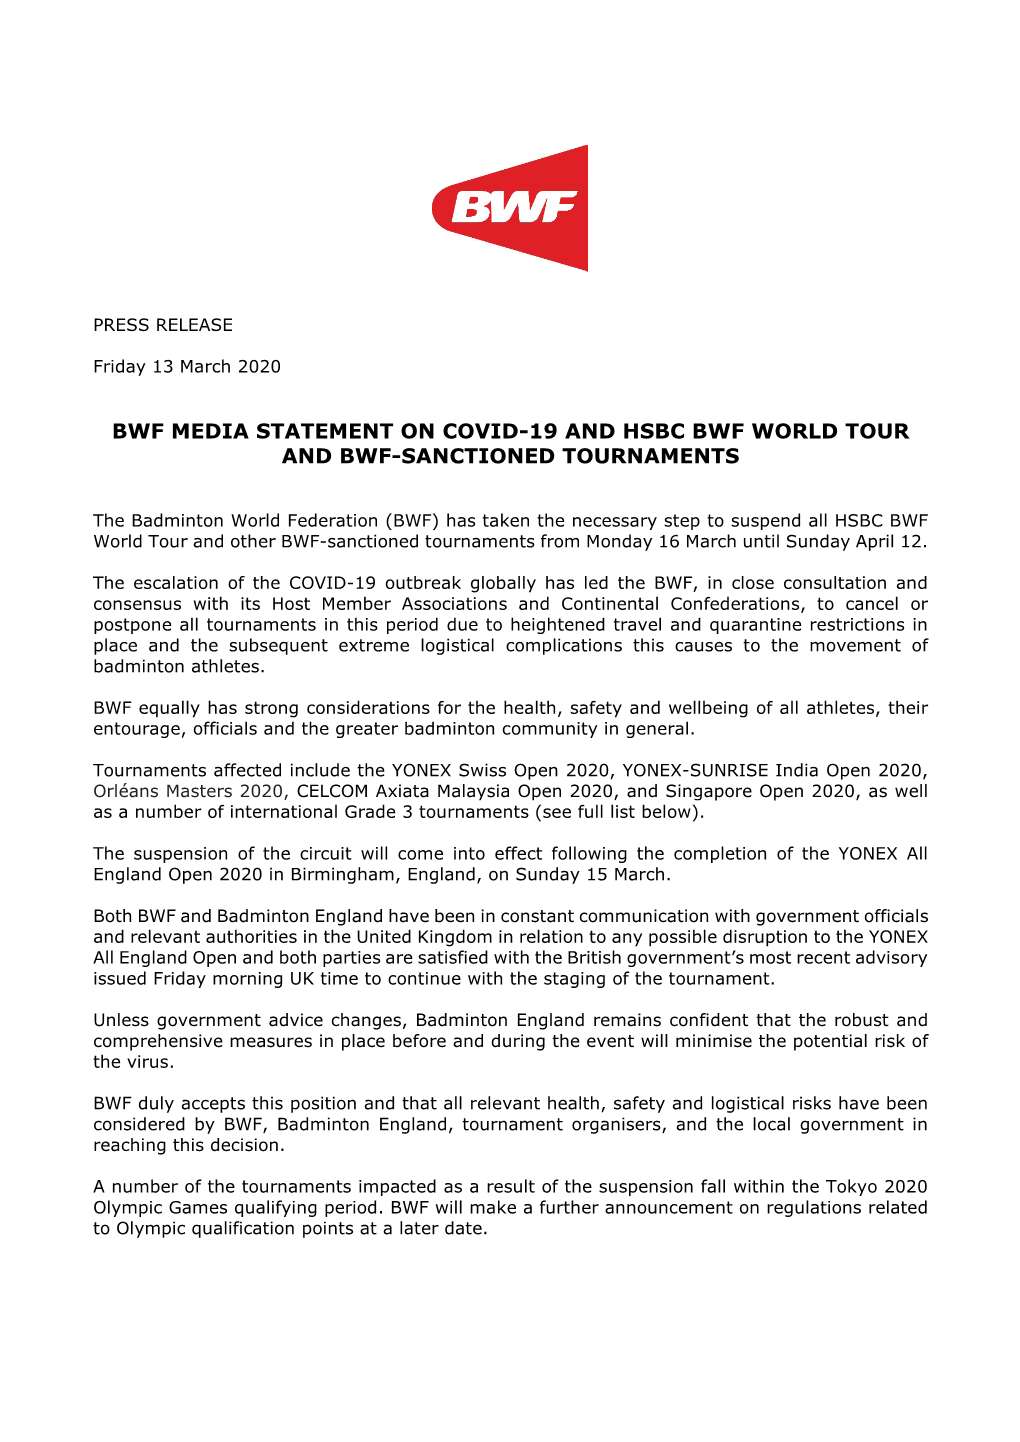 Bwf Media Statement on Covid-19 and Hsbc Bwf World Tour and Bwf-Sanctioned Tournaments